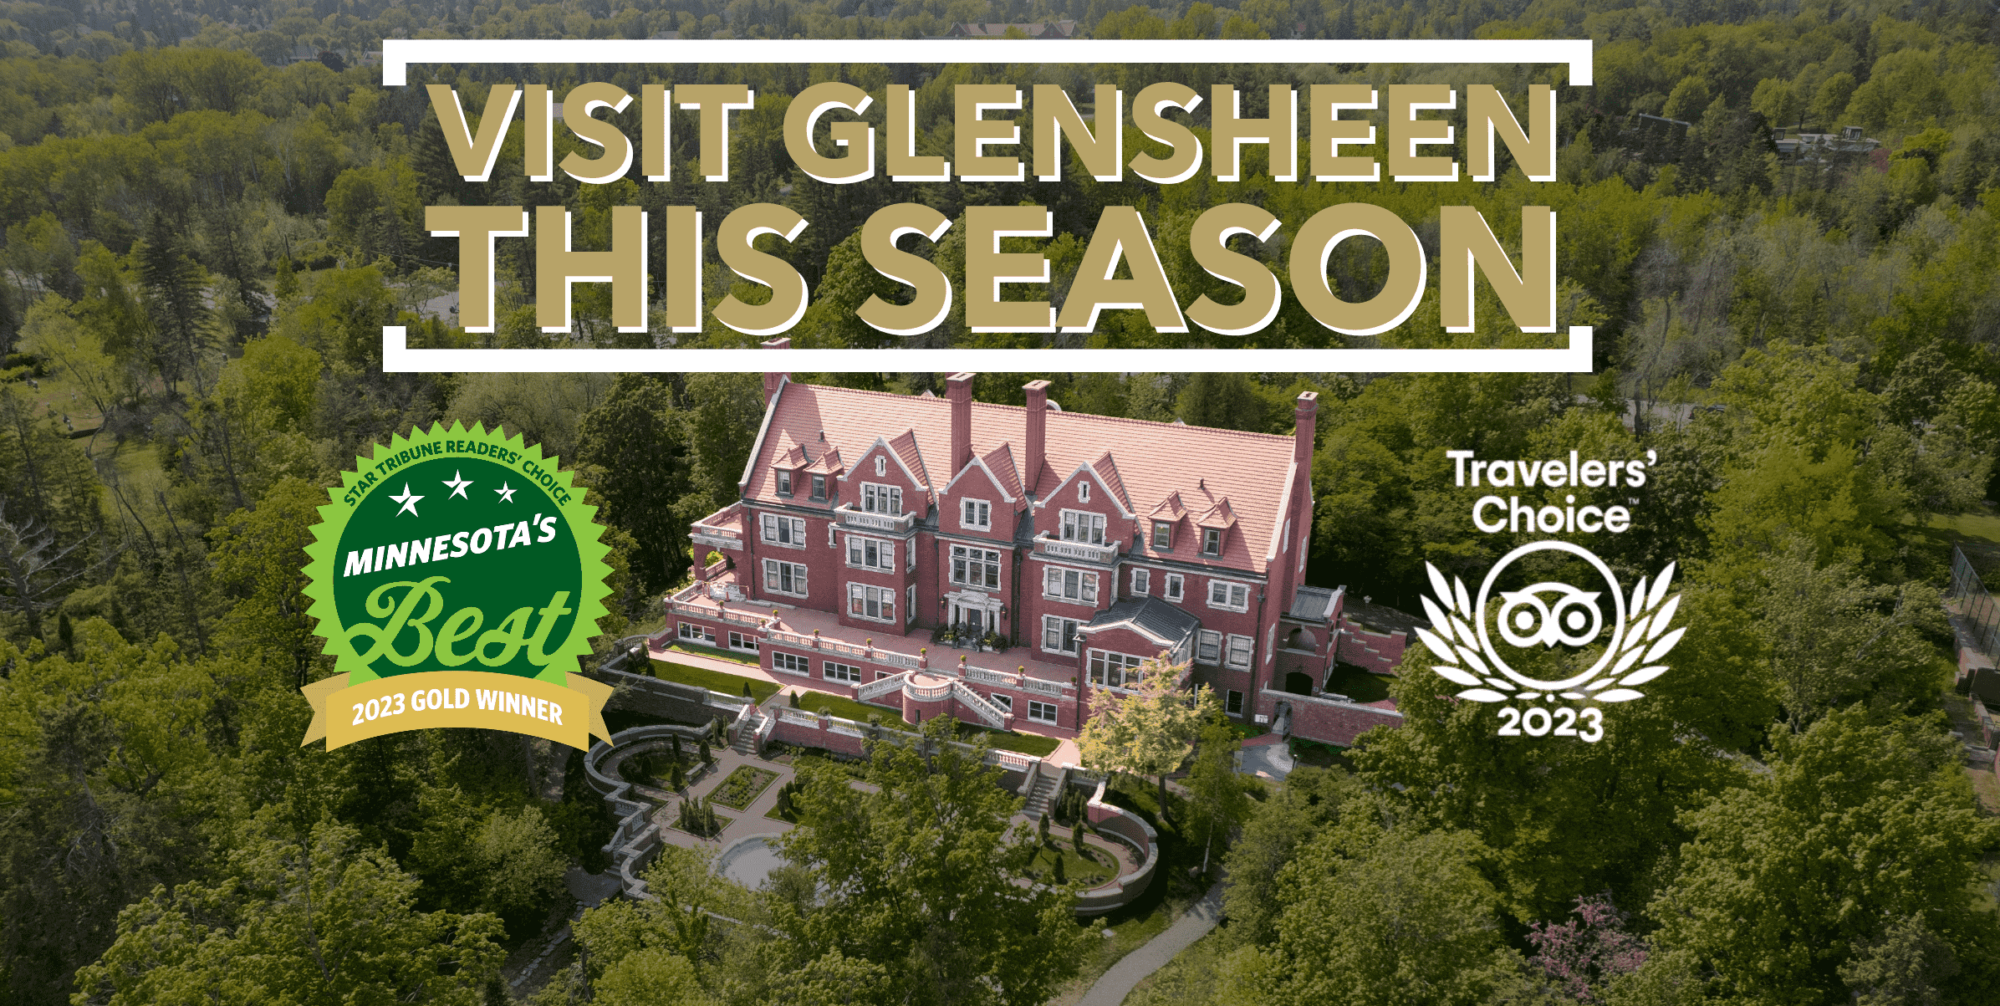 A red brick mansion stands in the middle of a lush green forest with the text Visit Glensheen This Season above it.